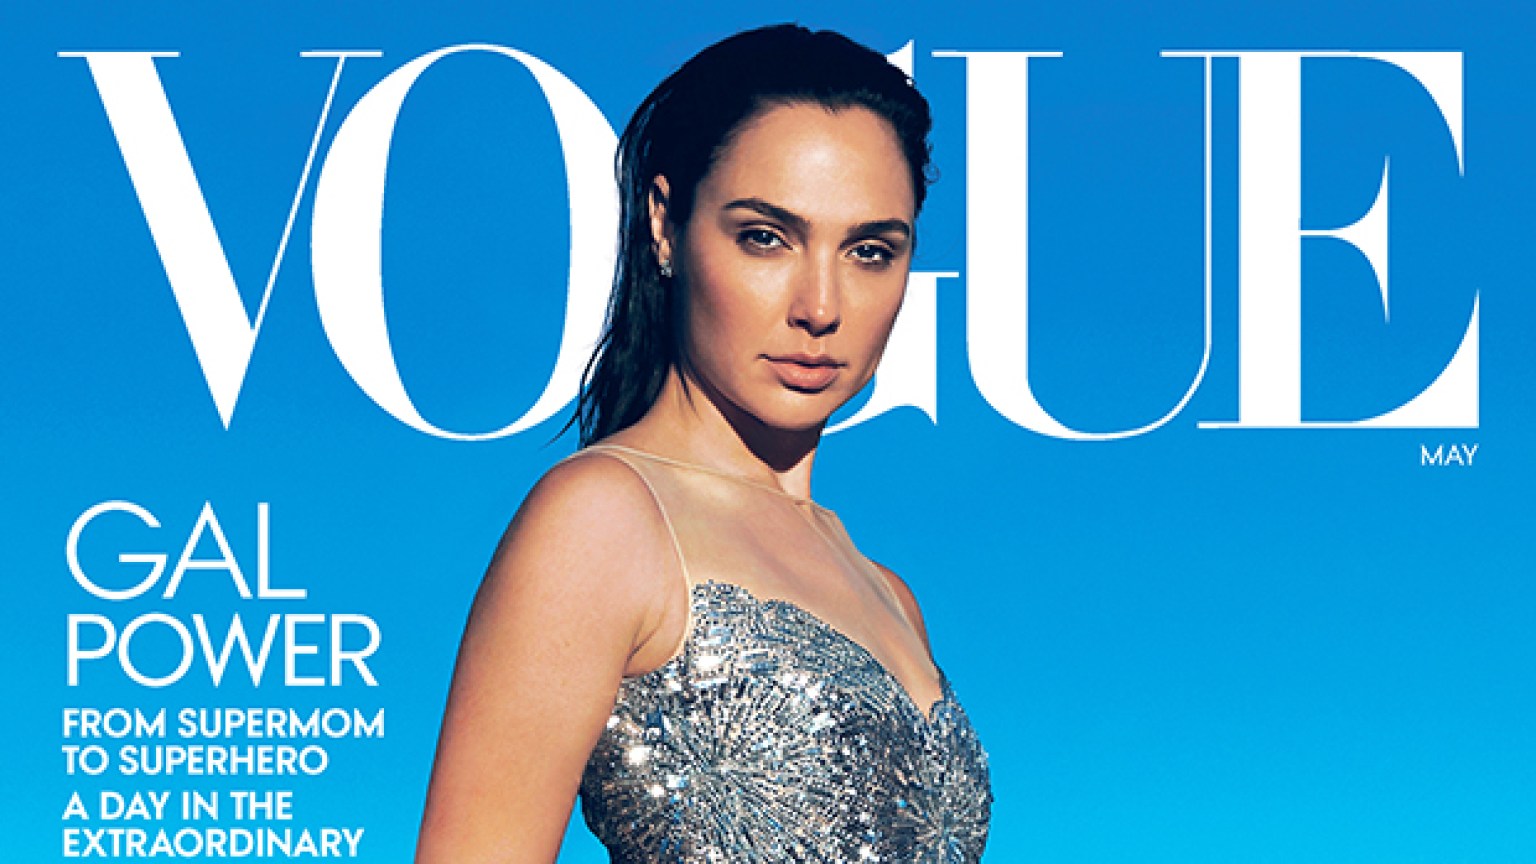 Gal Gadot’s Sequin Dress On ‘Vogue’ Cover May 2020 – Pics – Hollywood Life